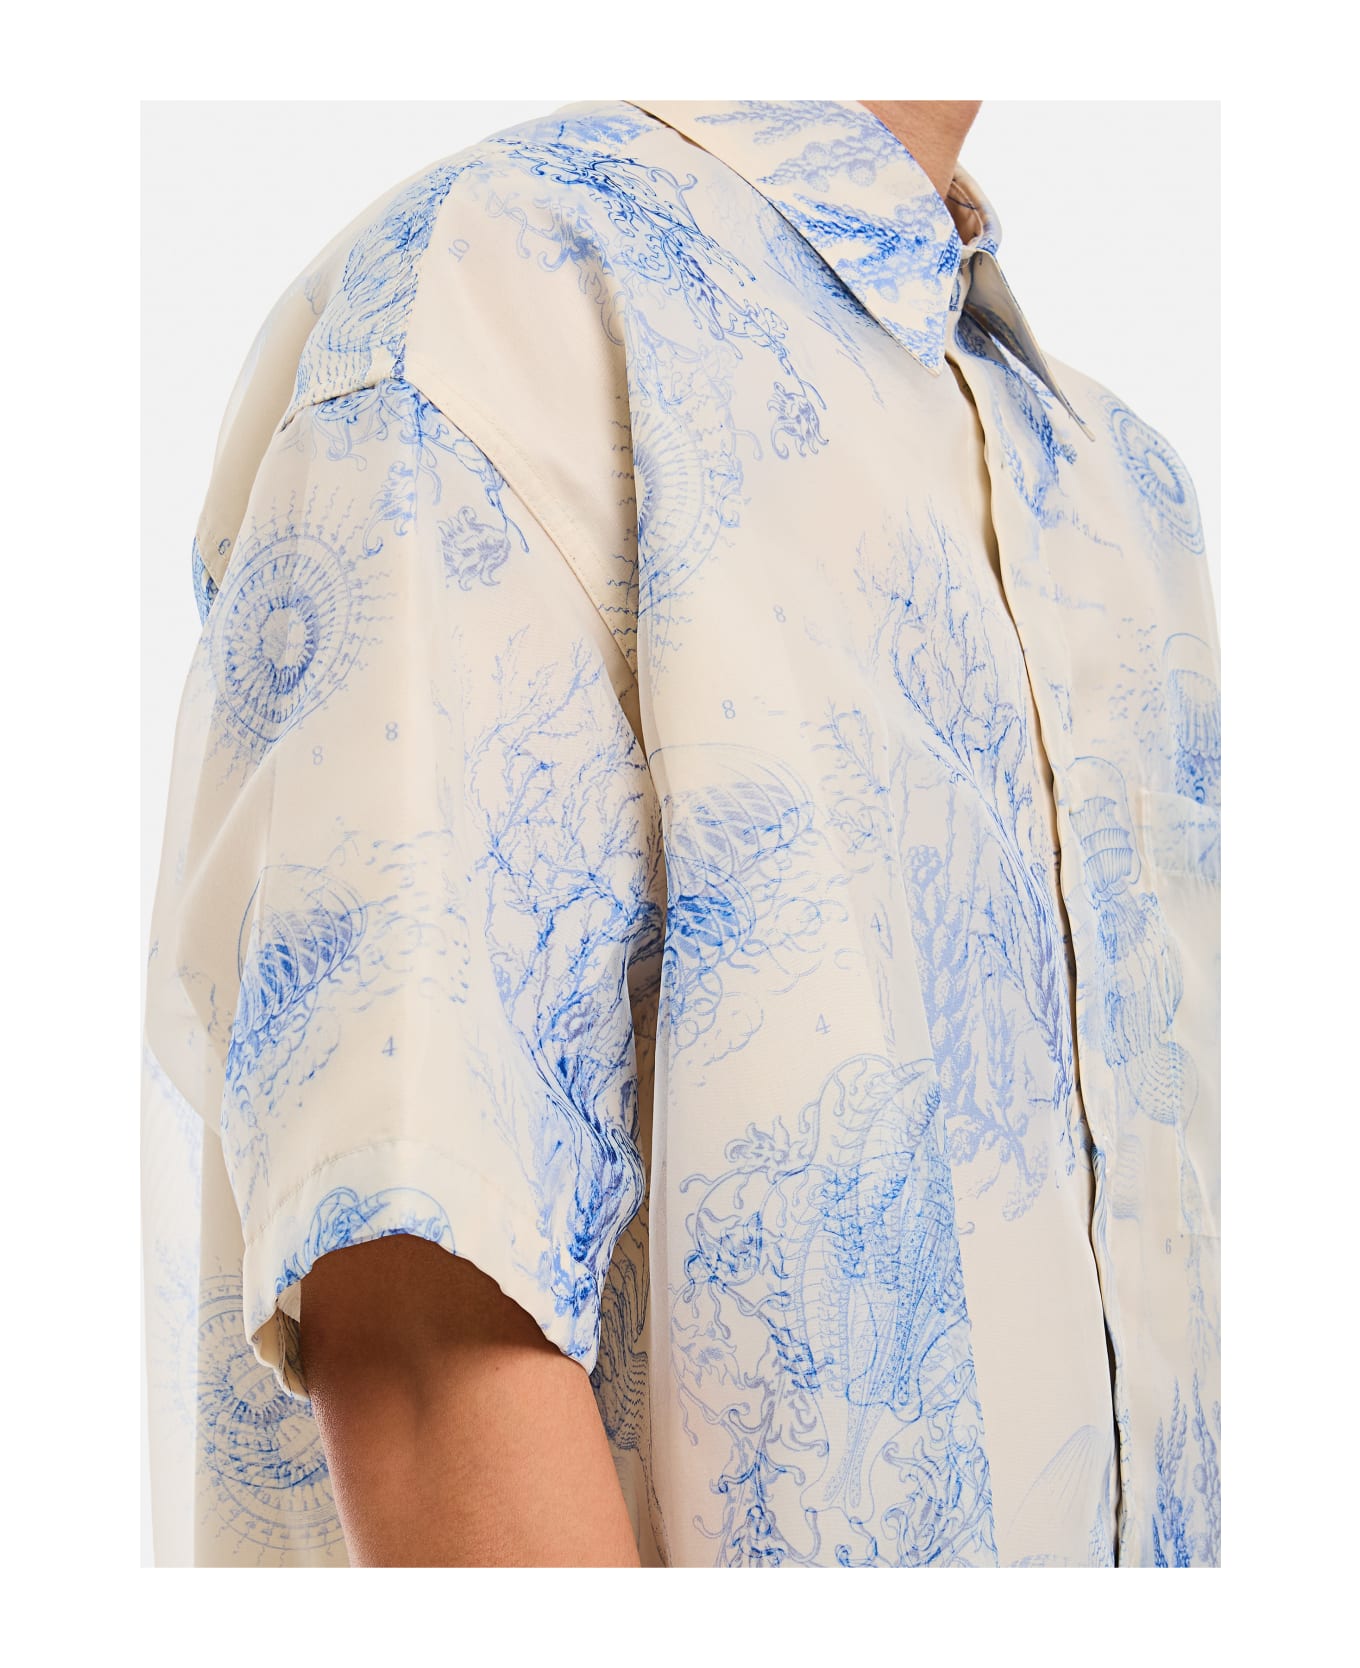 WOOYOUNGMI Printed Cotton Shirt - White